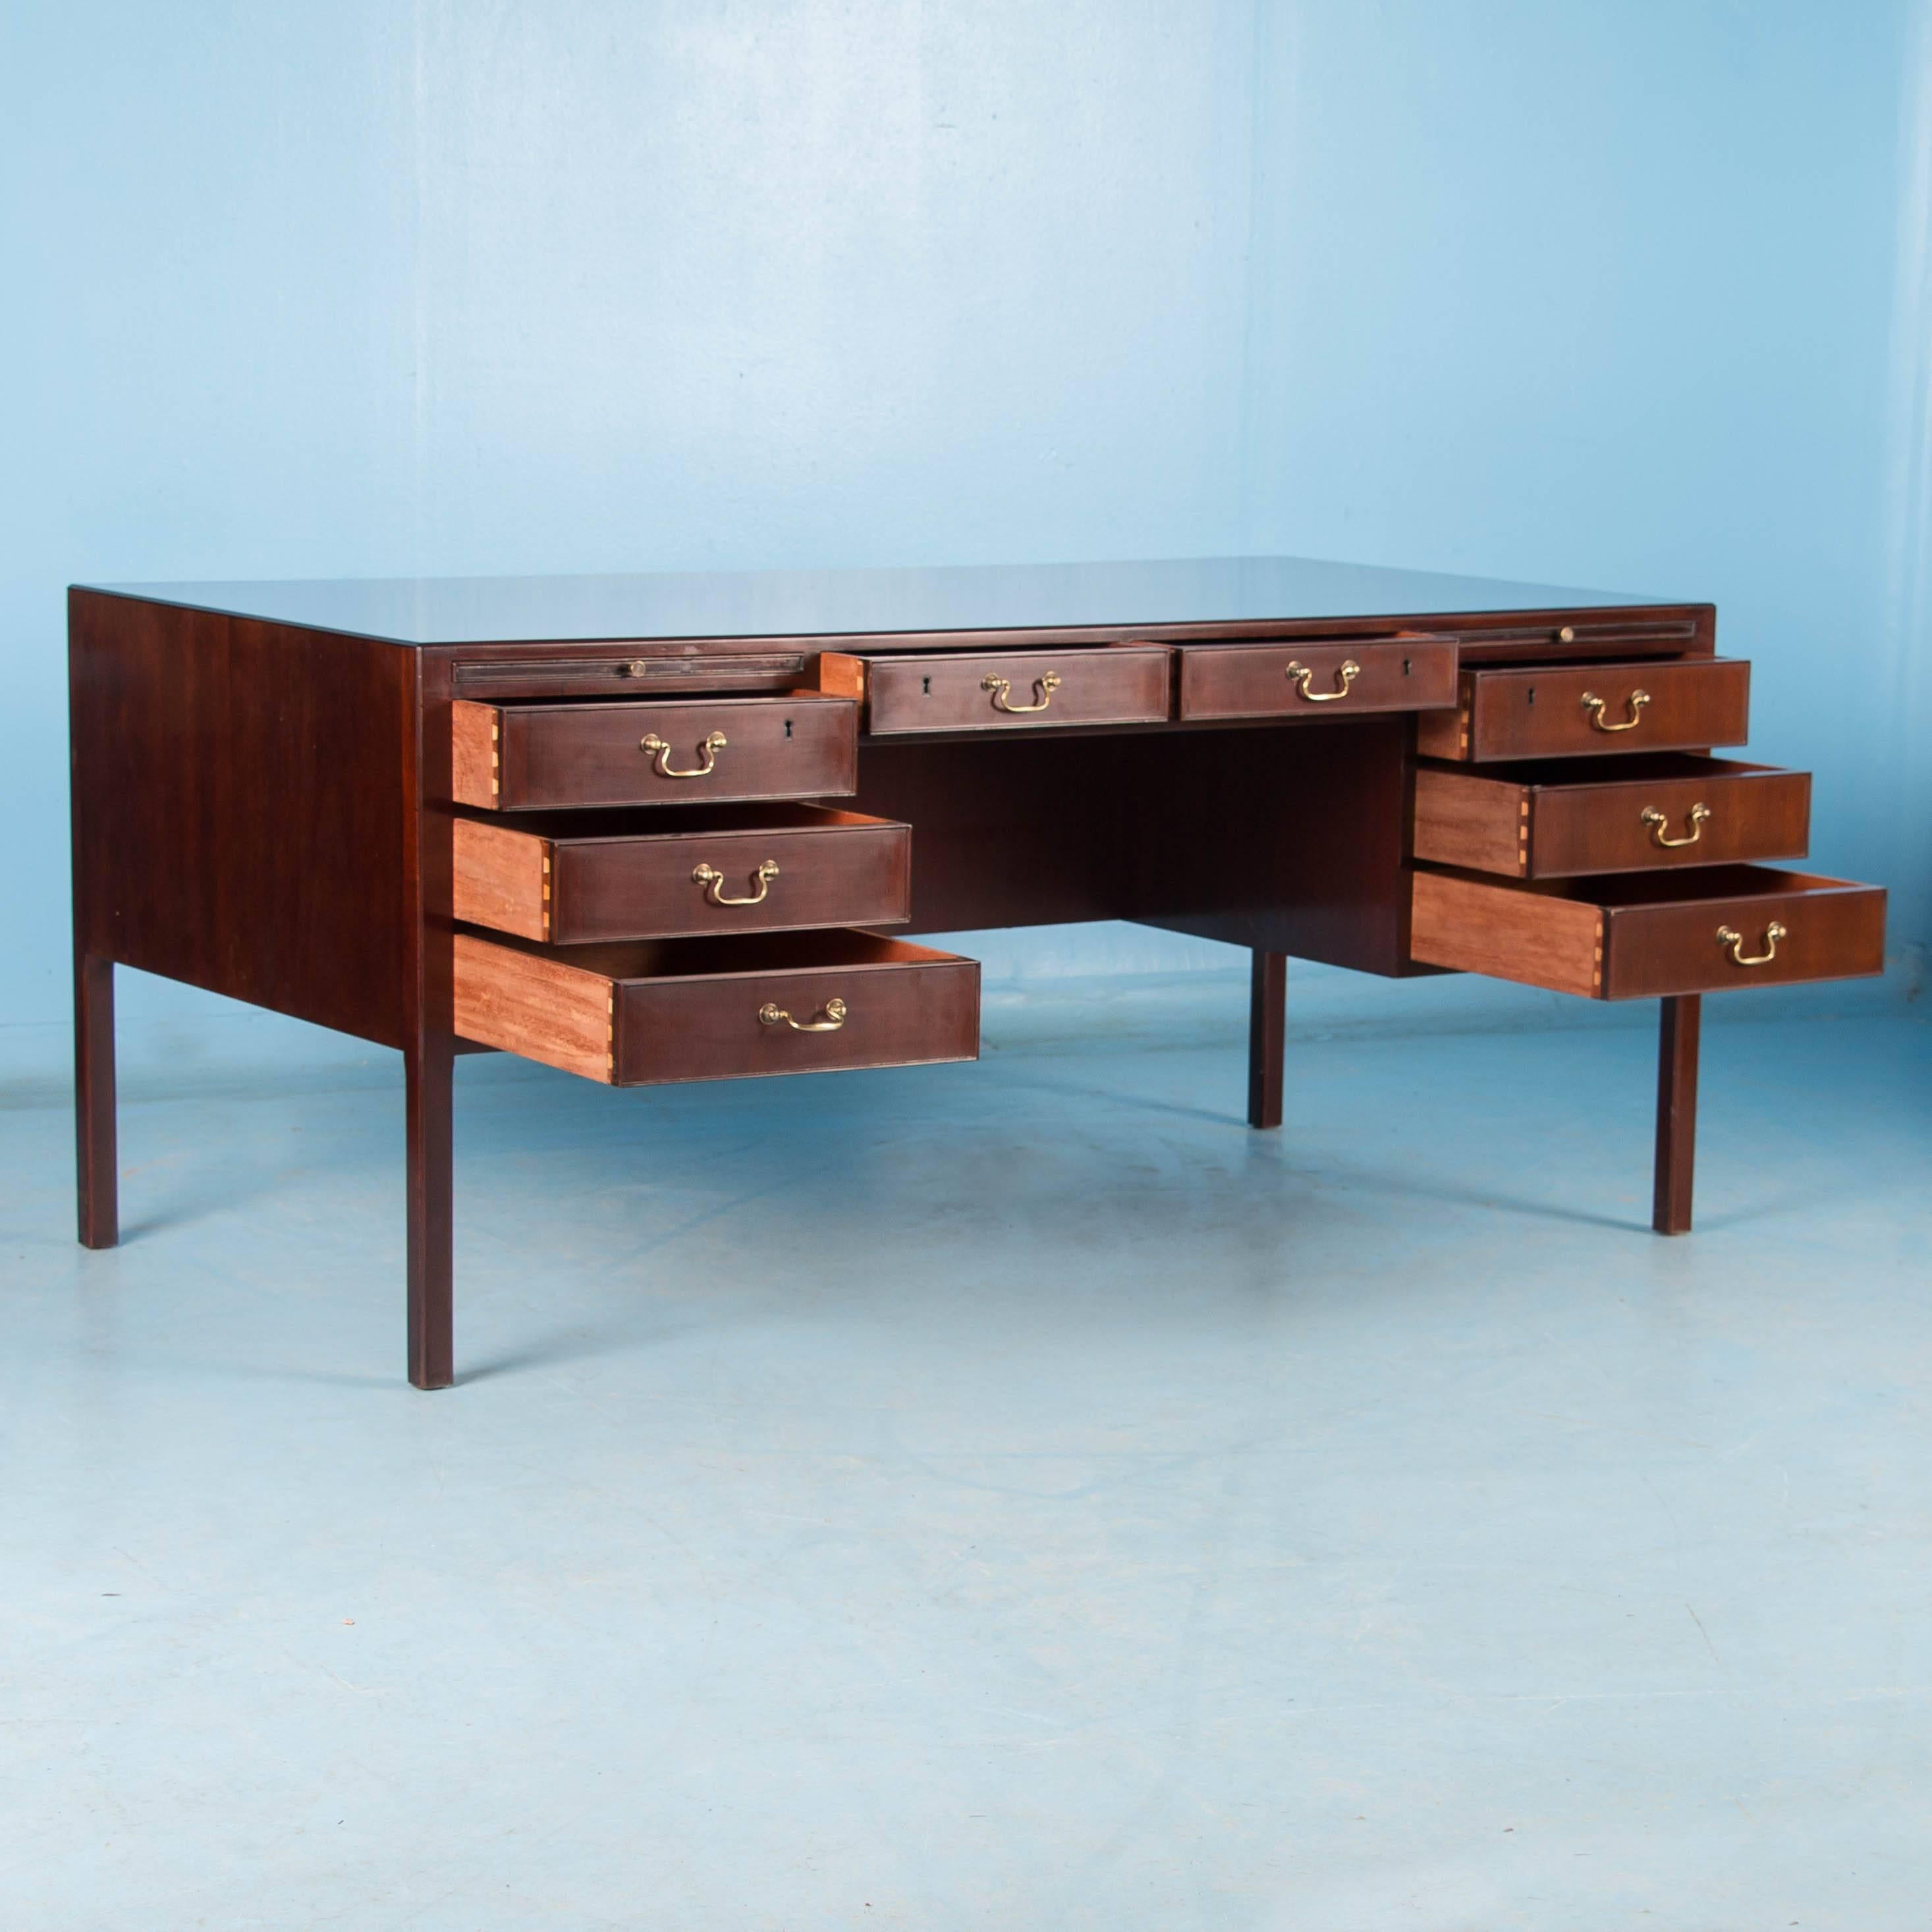 The aged dark red mahogany compliments the clean midcentury style in this free standing desk with locking drawers and original brass pulls. A few unique features are the drawers and drop down cabinet doors on the back. Please take a moment to